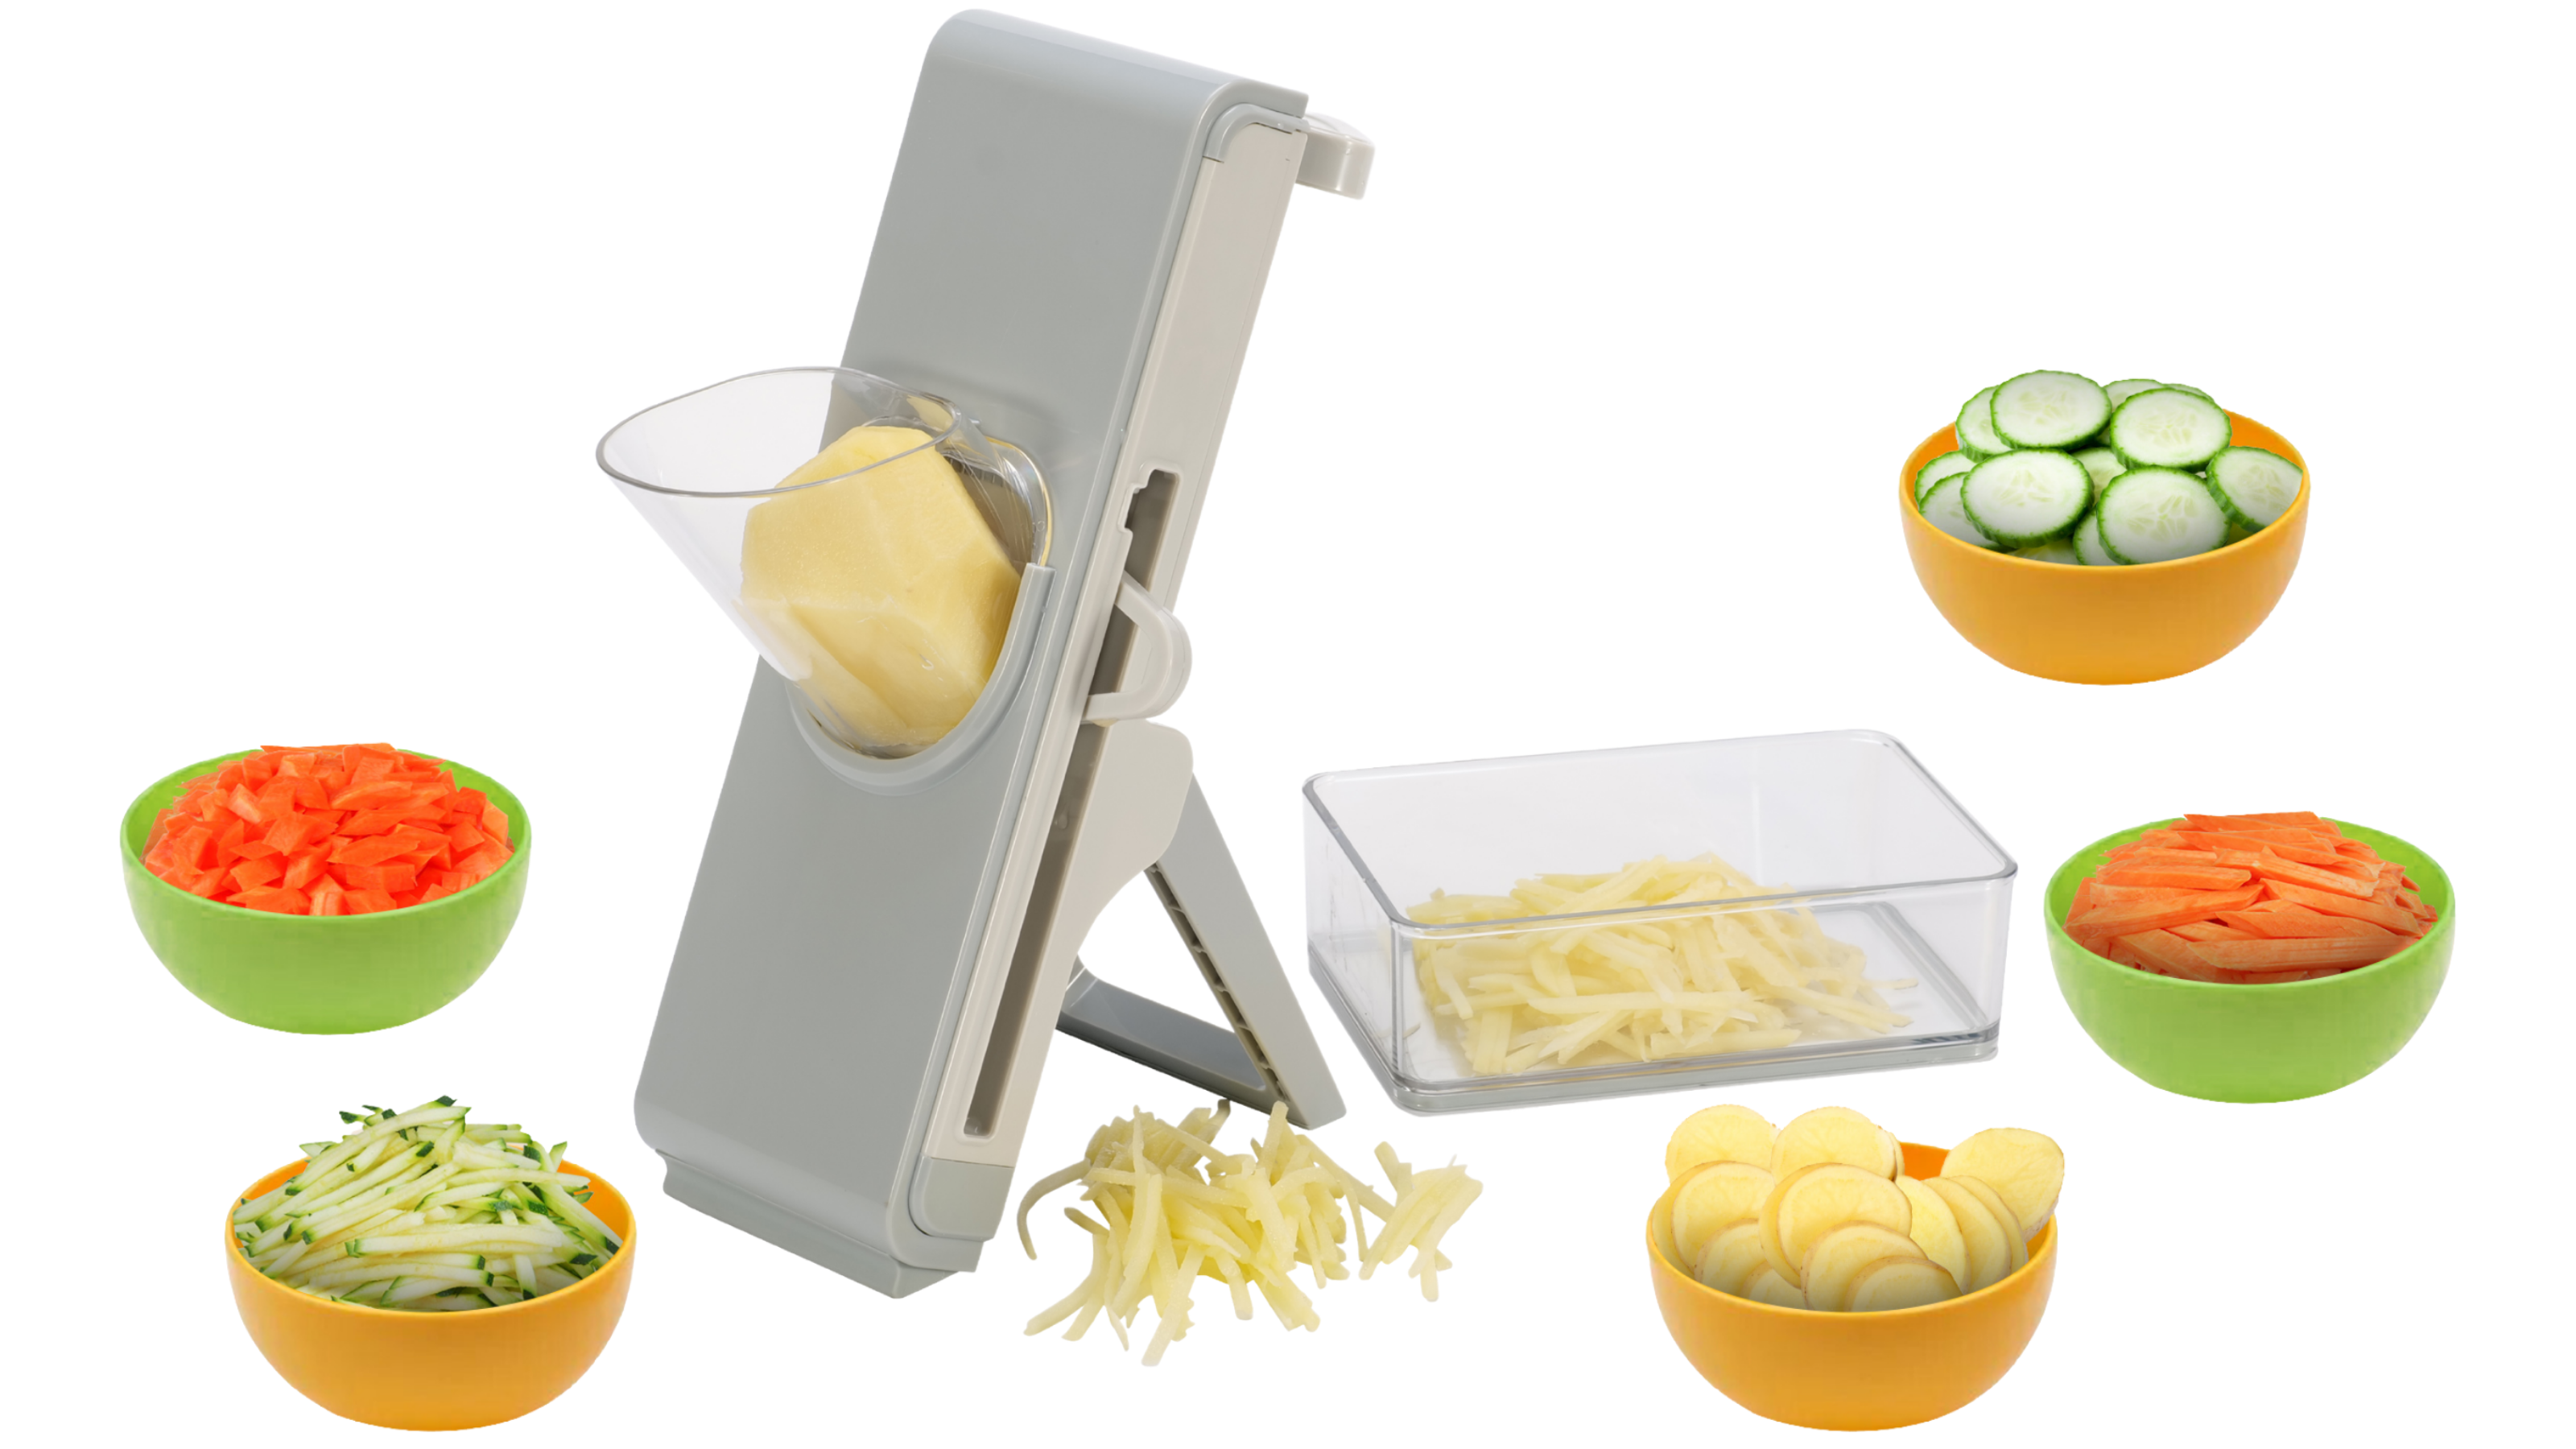 Brieftons QuickPush Food Chopper (BR-QP-02): Strongest & 200% More Container